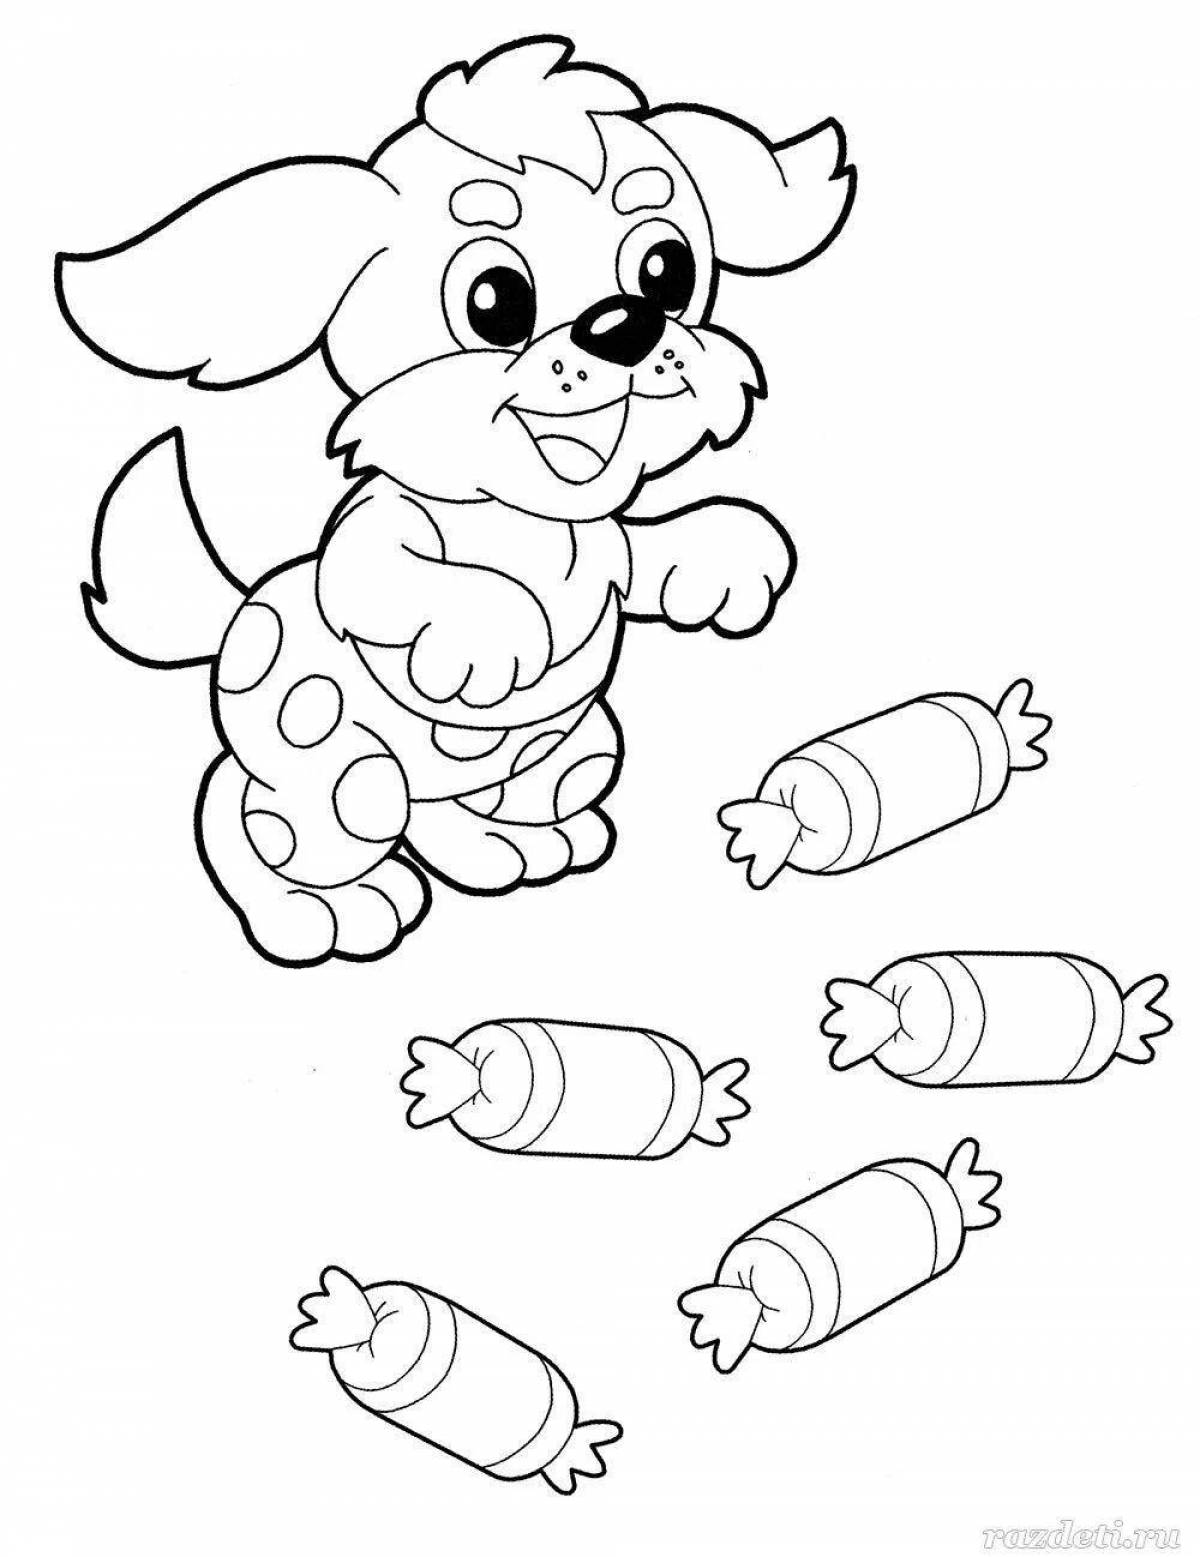 Fun coloring pages for kids 6-7 years old